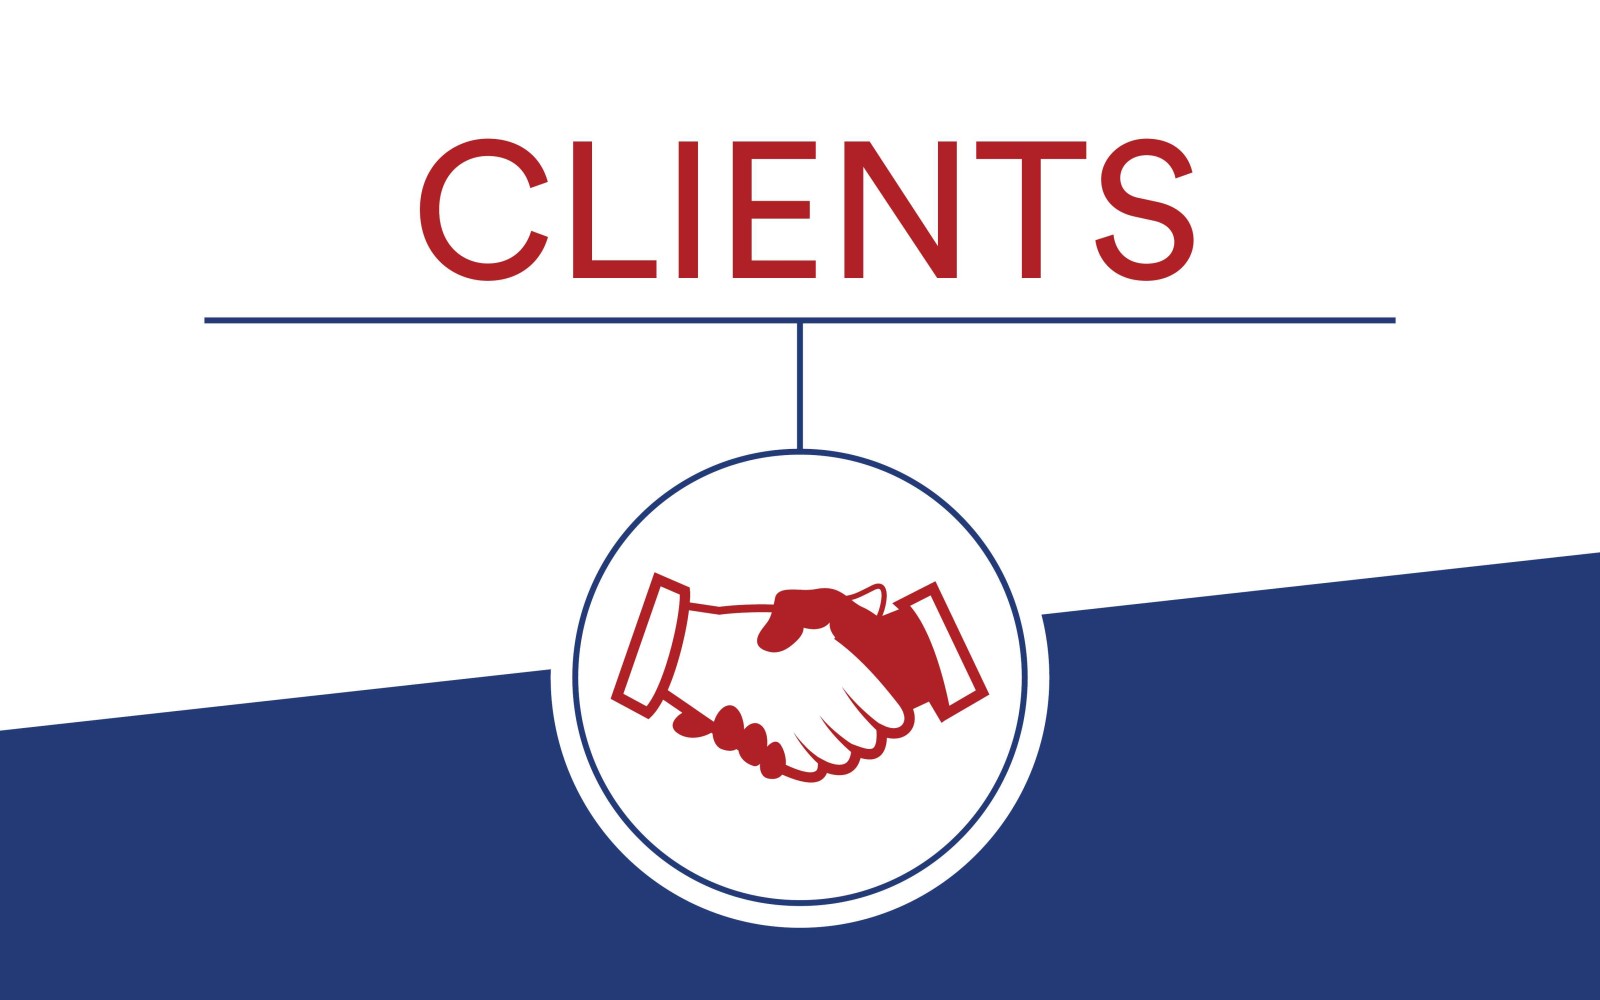 Our commitments to our clients